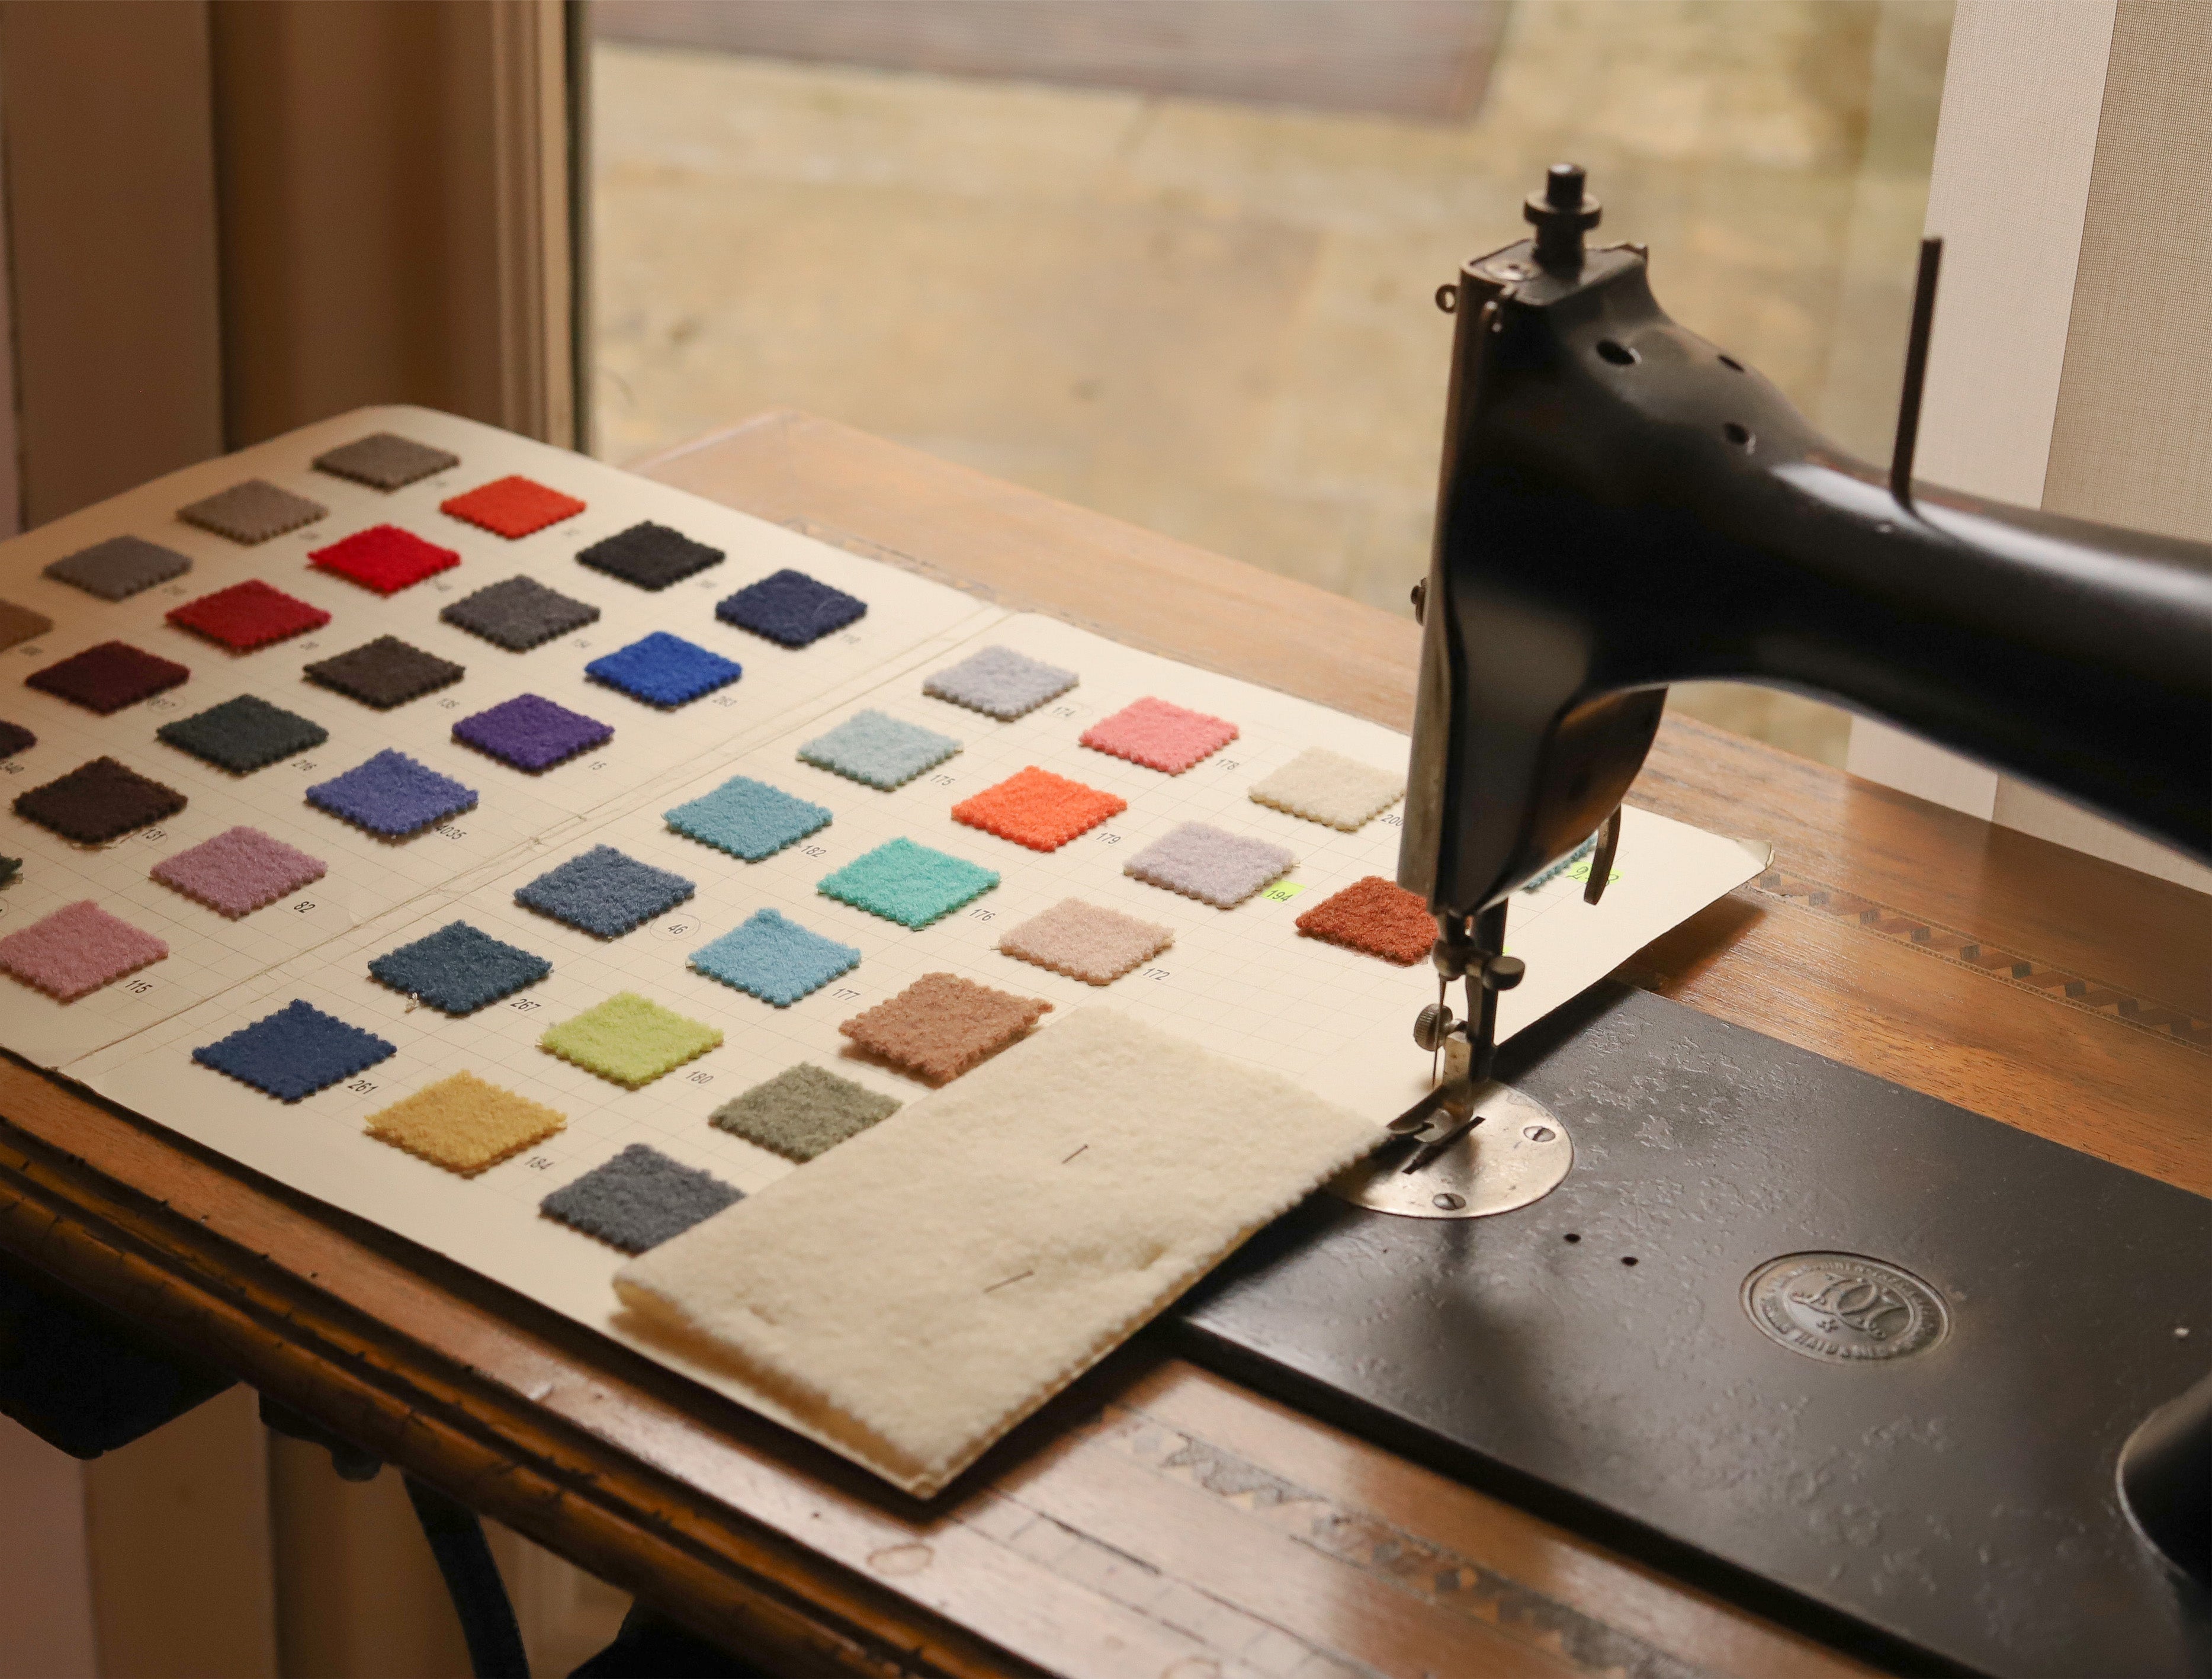 Wool fabric color chart near a sewing machine in Marta Scarampi's atelier